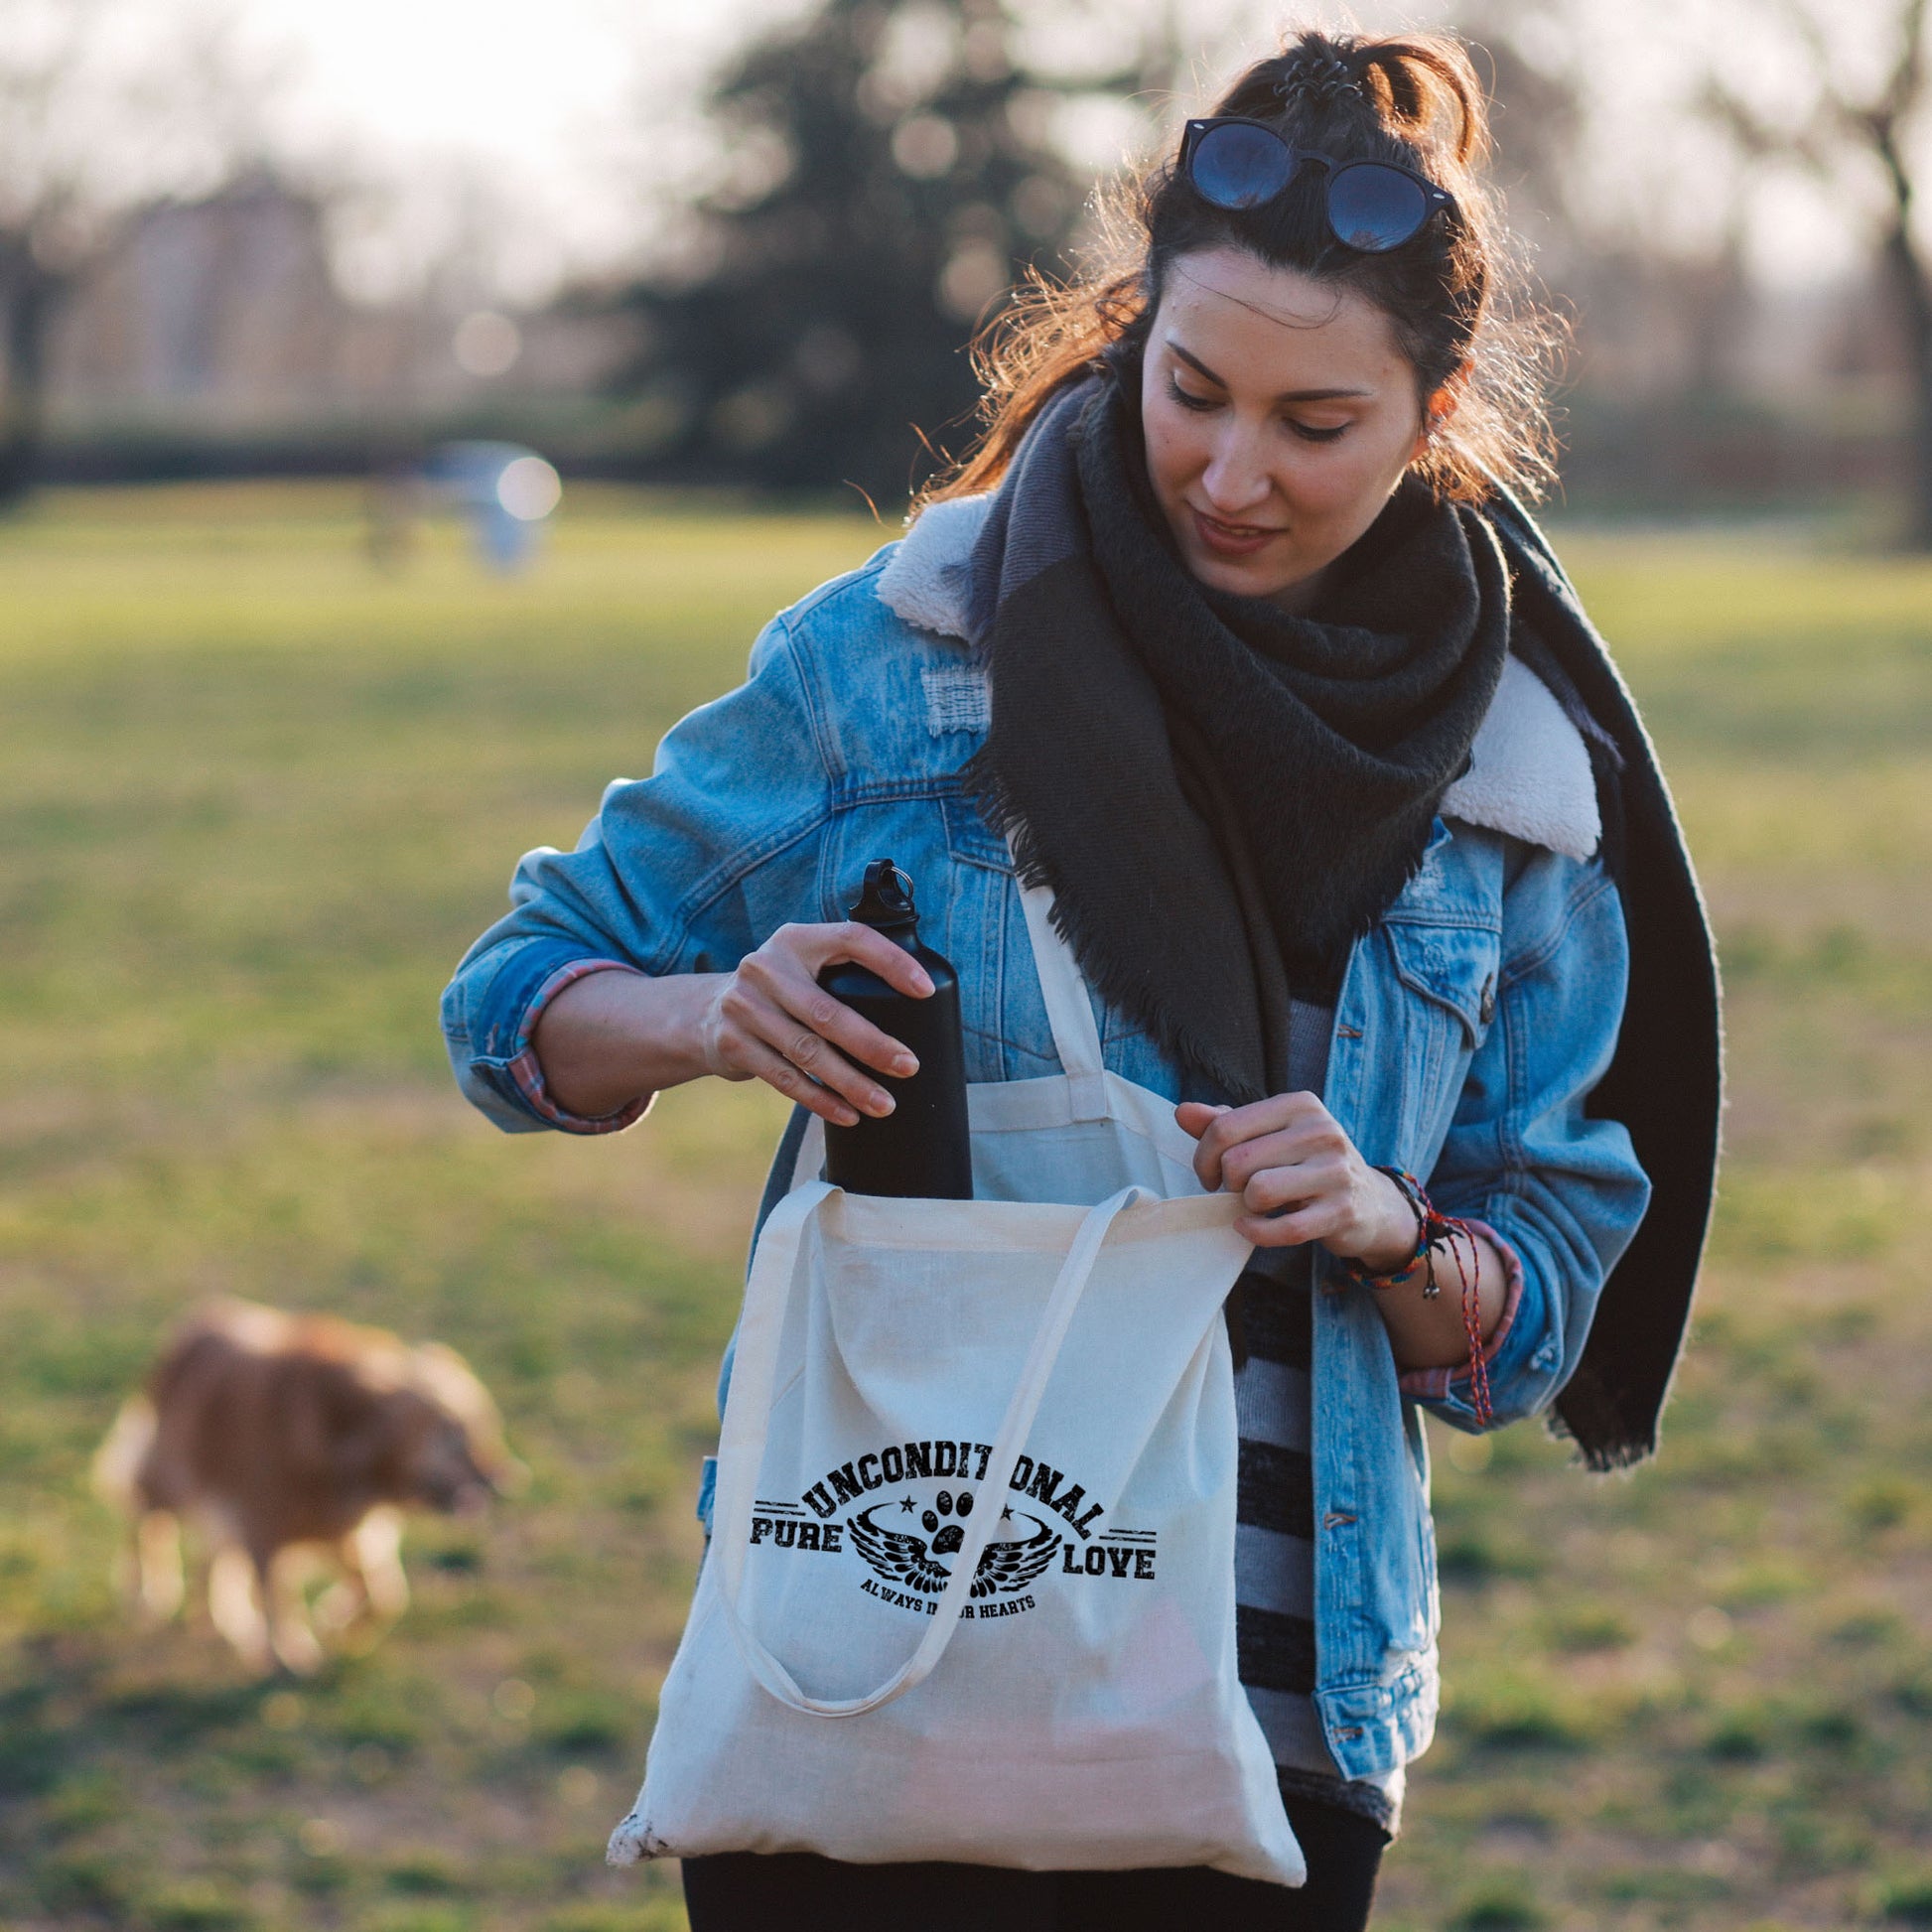 A woman strolls with her dog in the park, pausing to peer into her Dogs Pure Love tote bag. With a gentle gaze downward, she retrieves her water bottle.